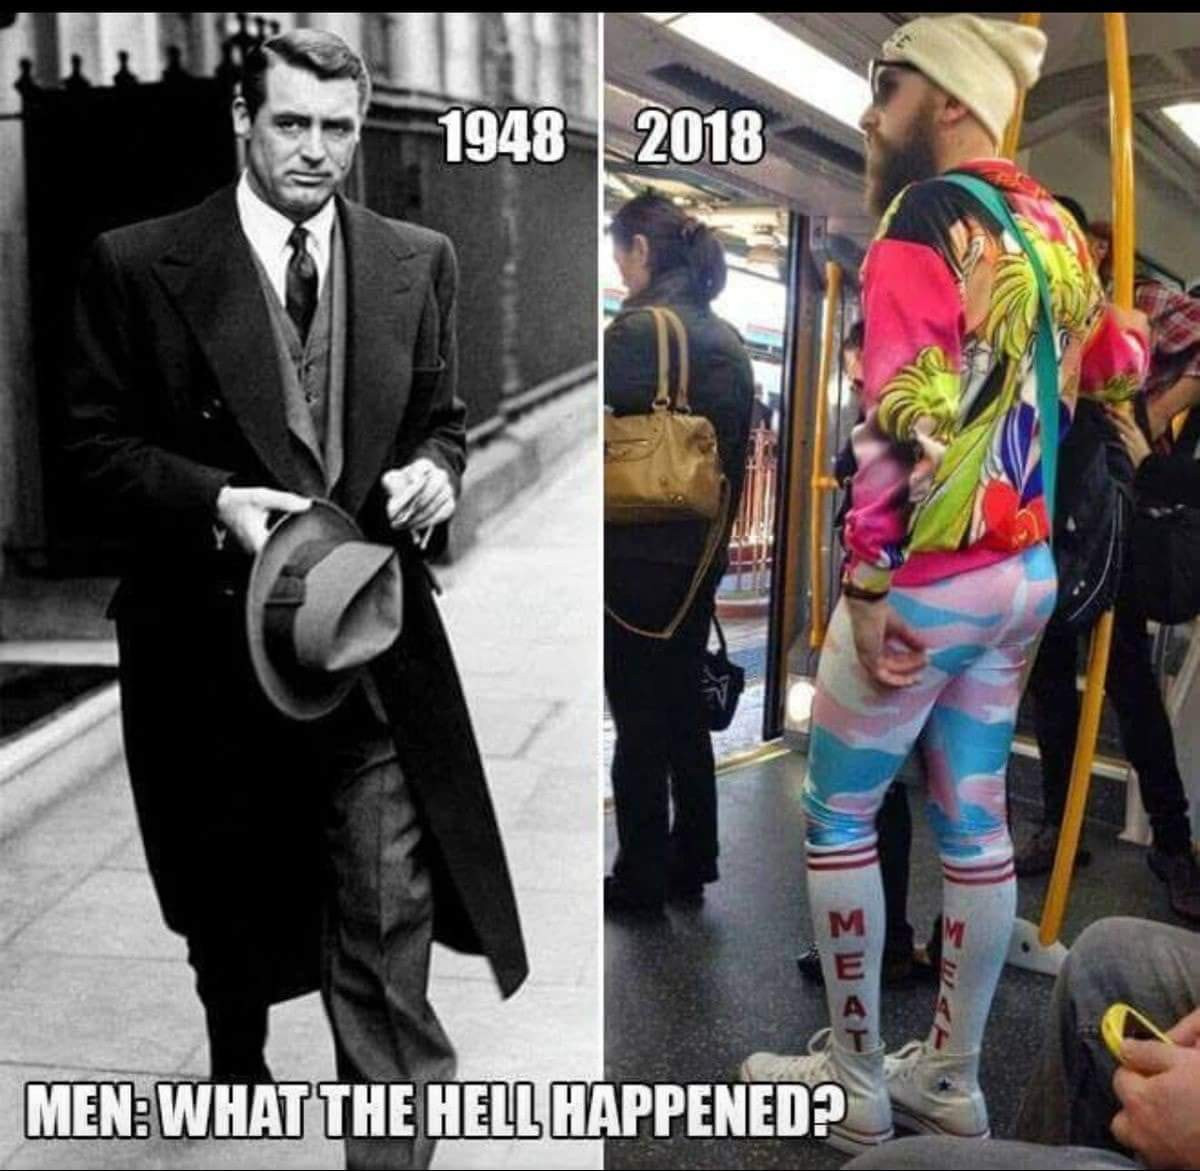 men what the hell happened - 1948 2018 Wc MenWhat The Hell Happened?